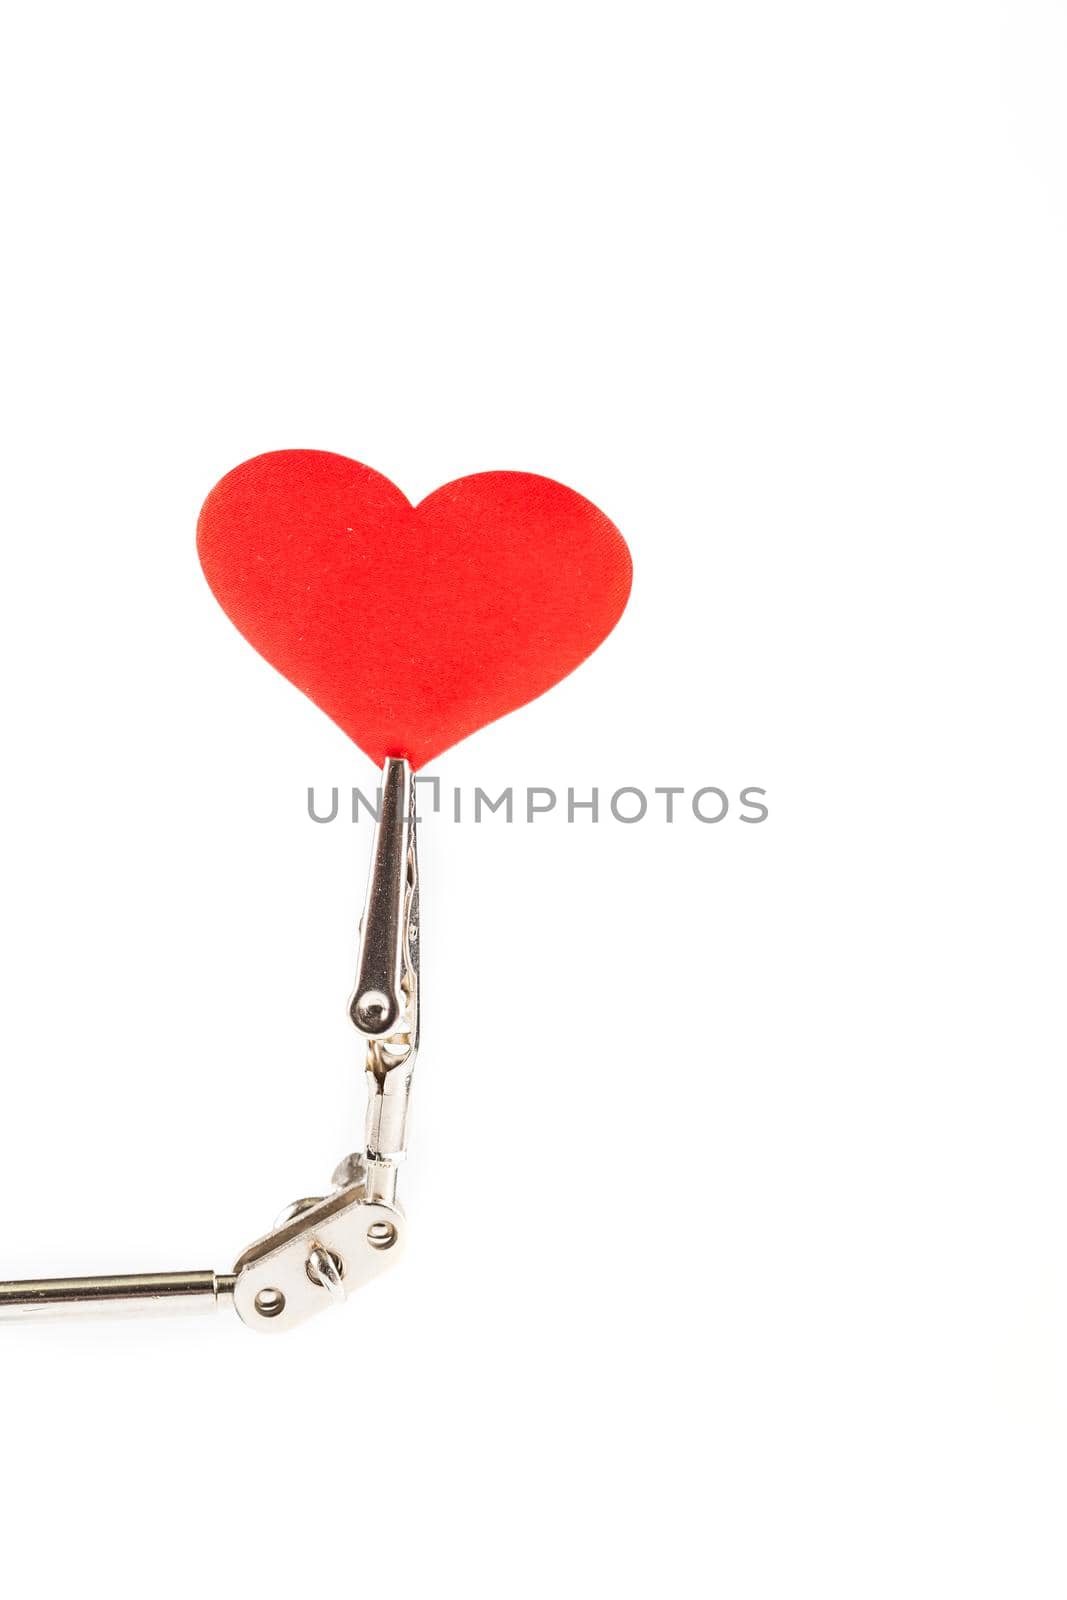 Valentines Day background with tool third hand holding hearts on white by galinasharapova